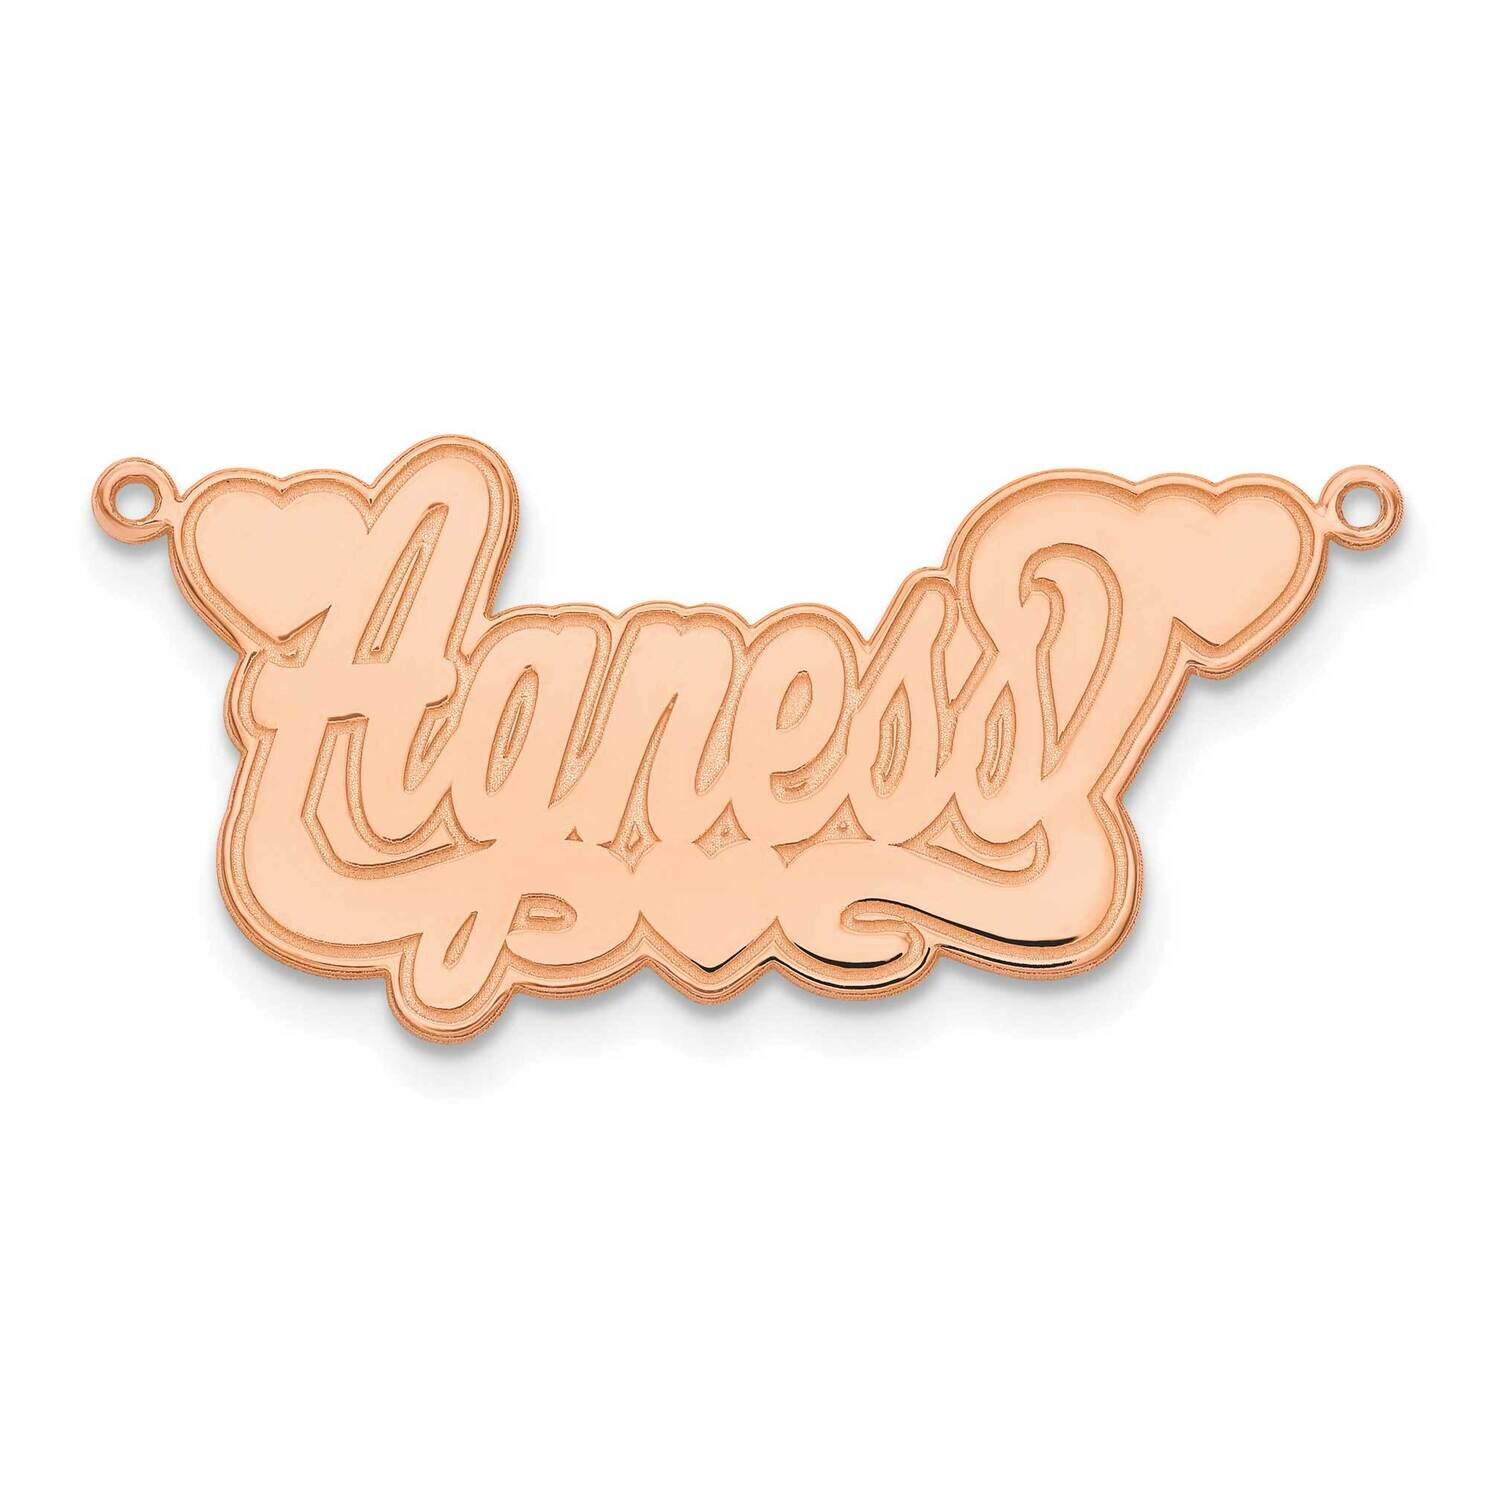 Etched Hearts Name Plate 14k Rose Gold XNA838R